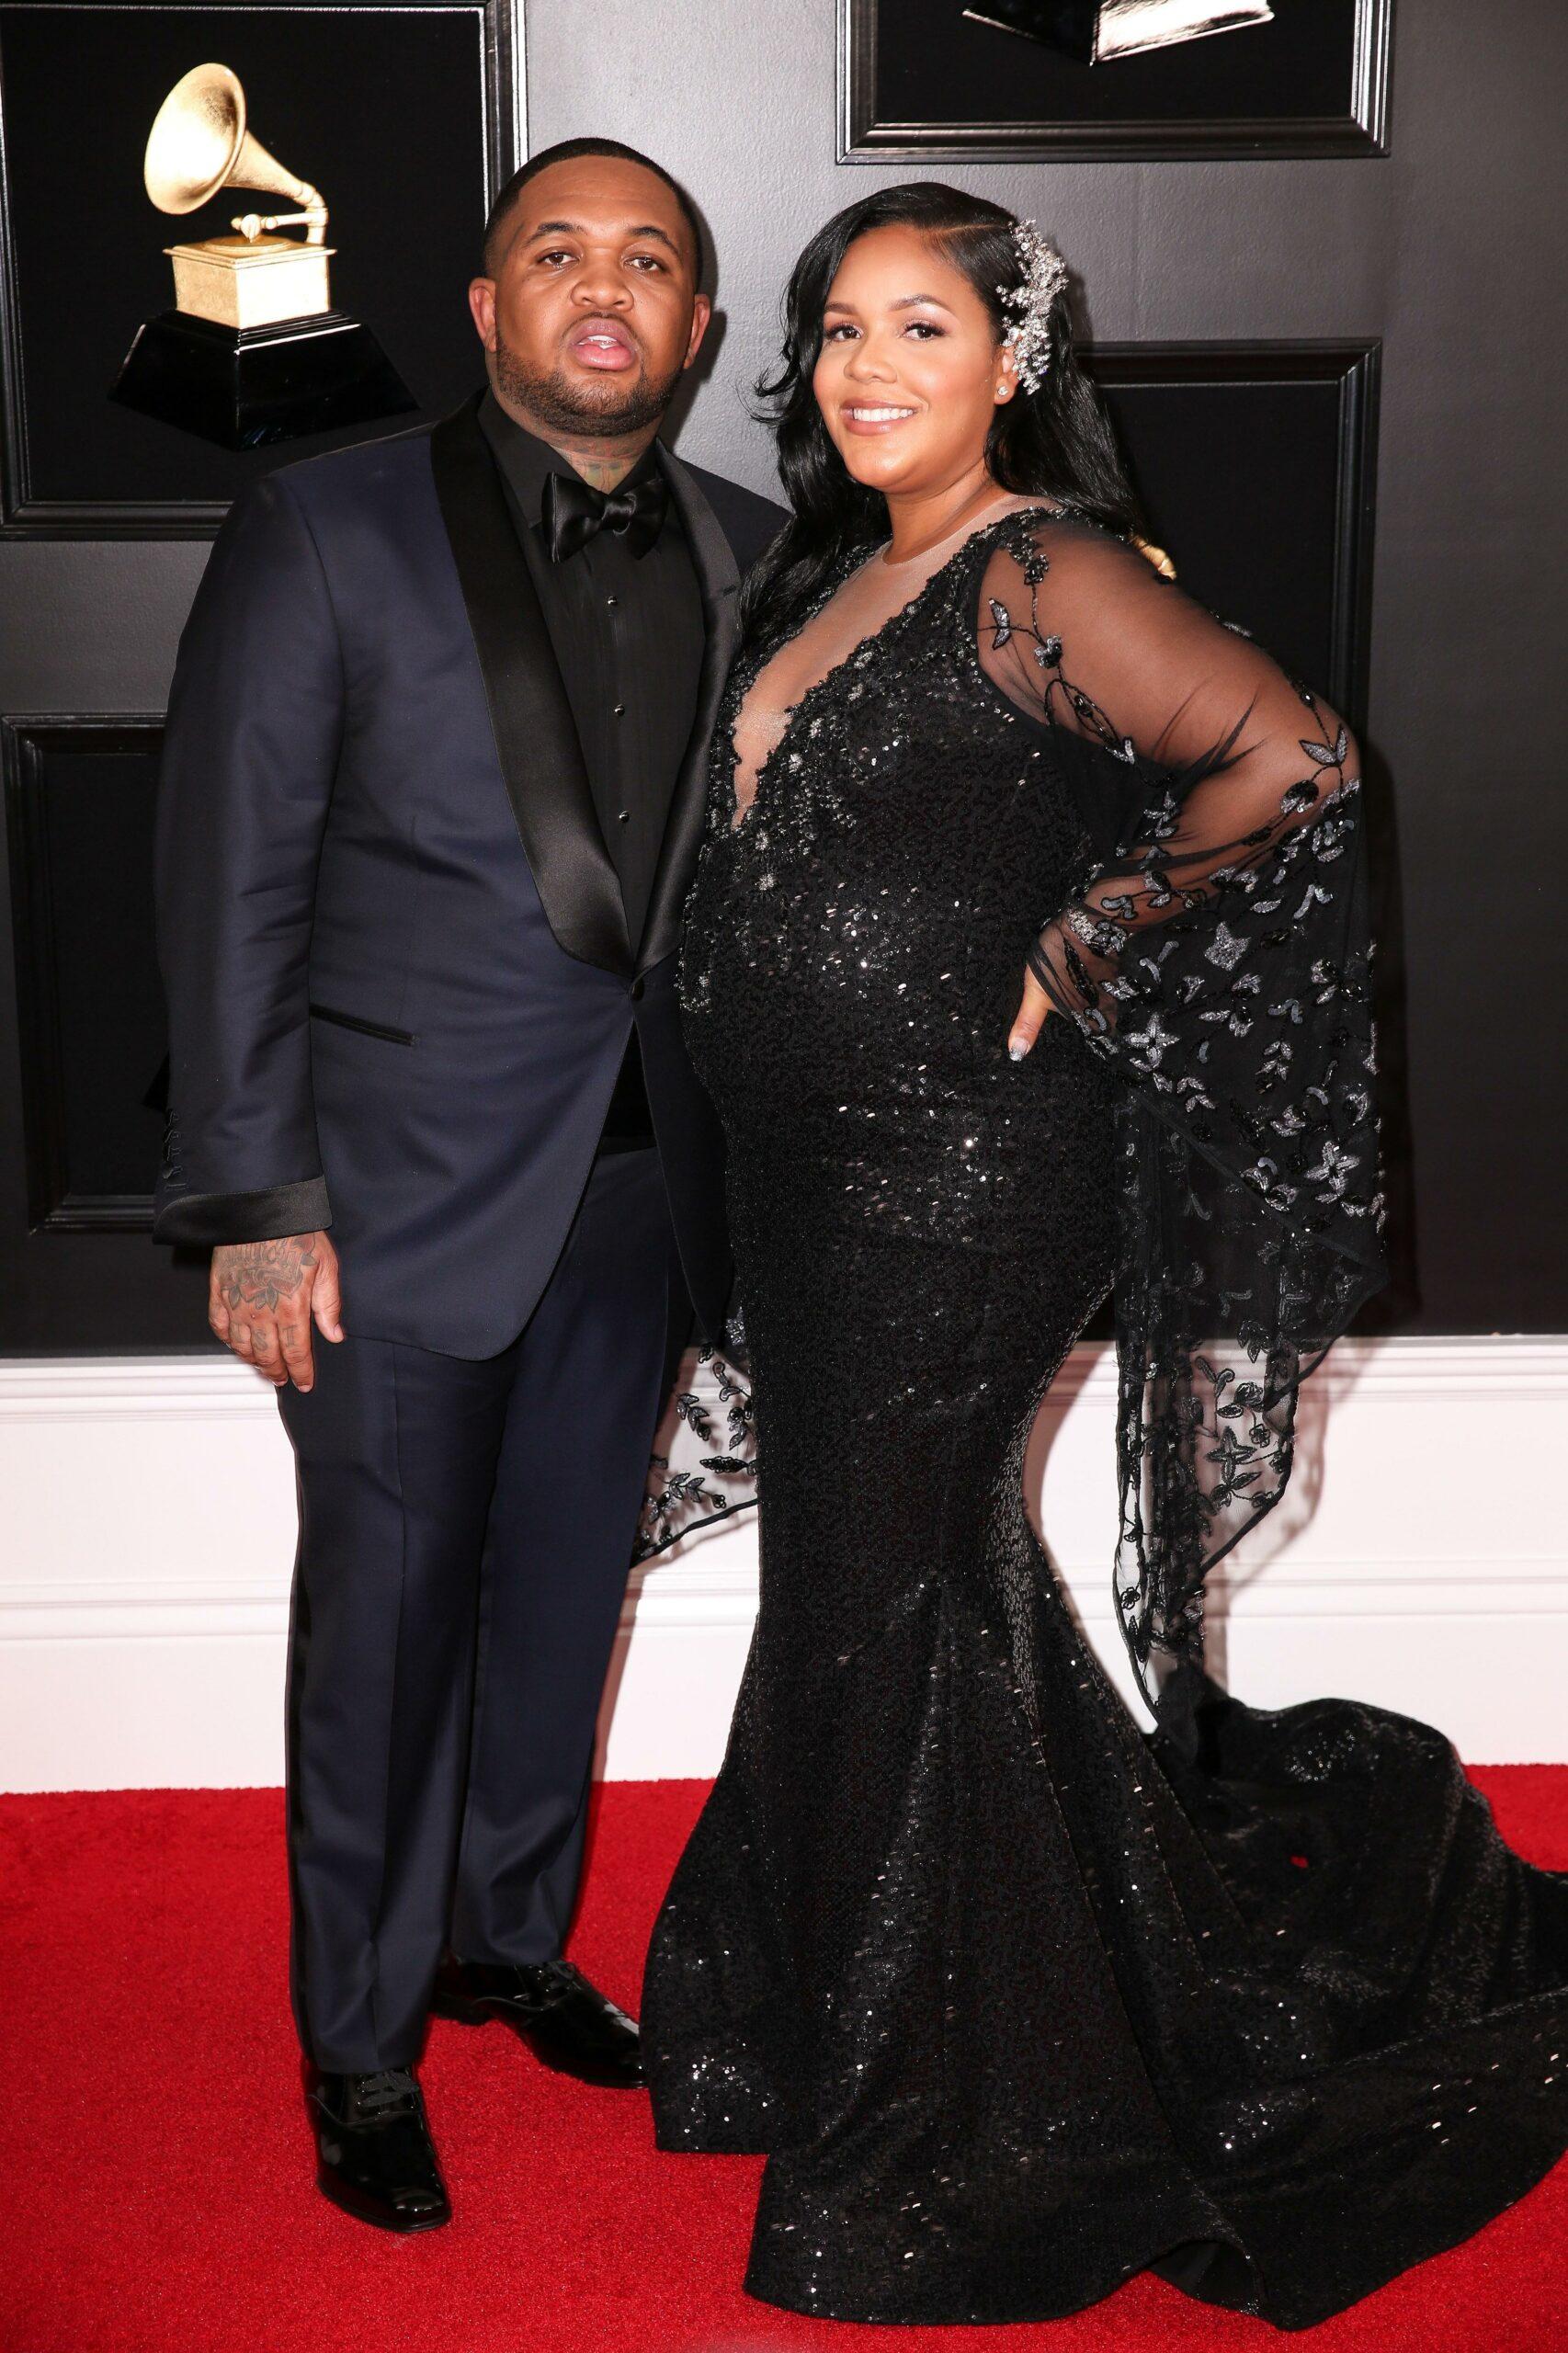 DJ MUSTARD and wife CHANEL THIERRY divorced